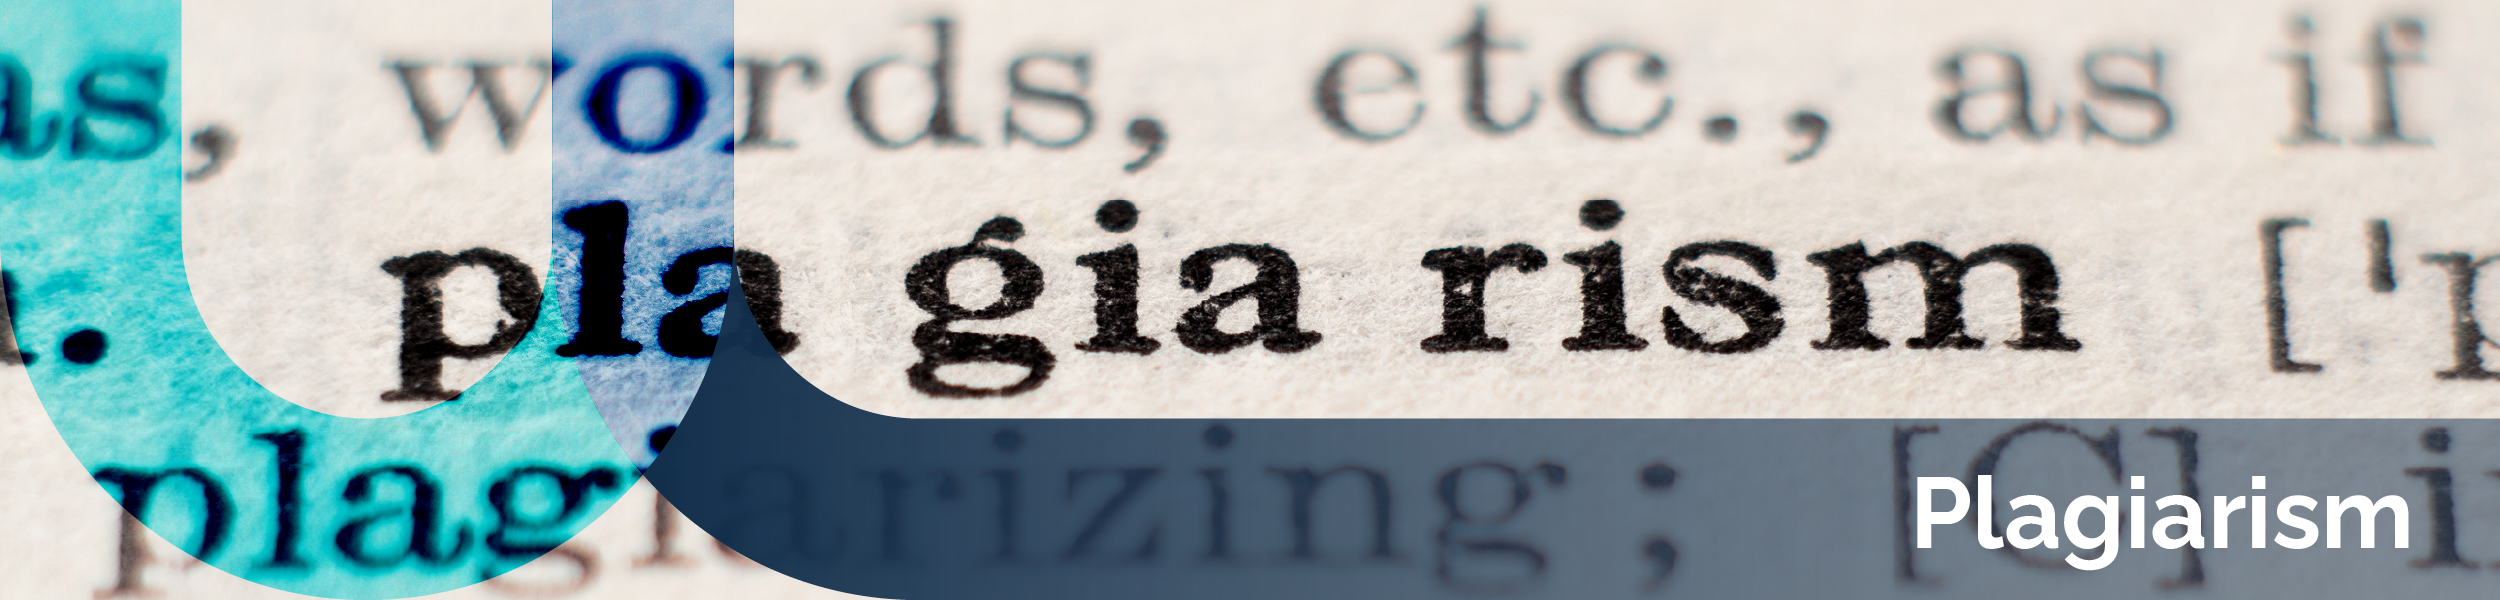 I’ve been accused of plagiarism – what can I do?